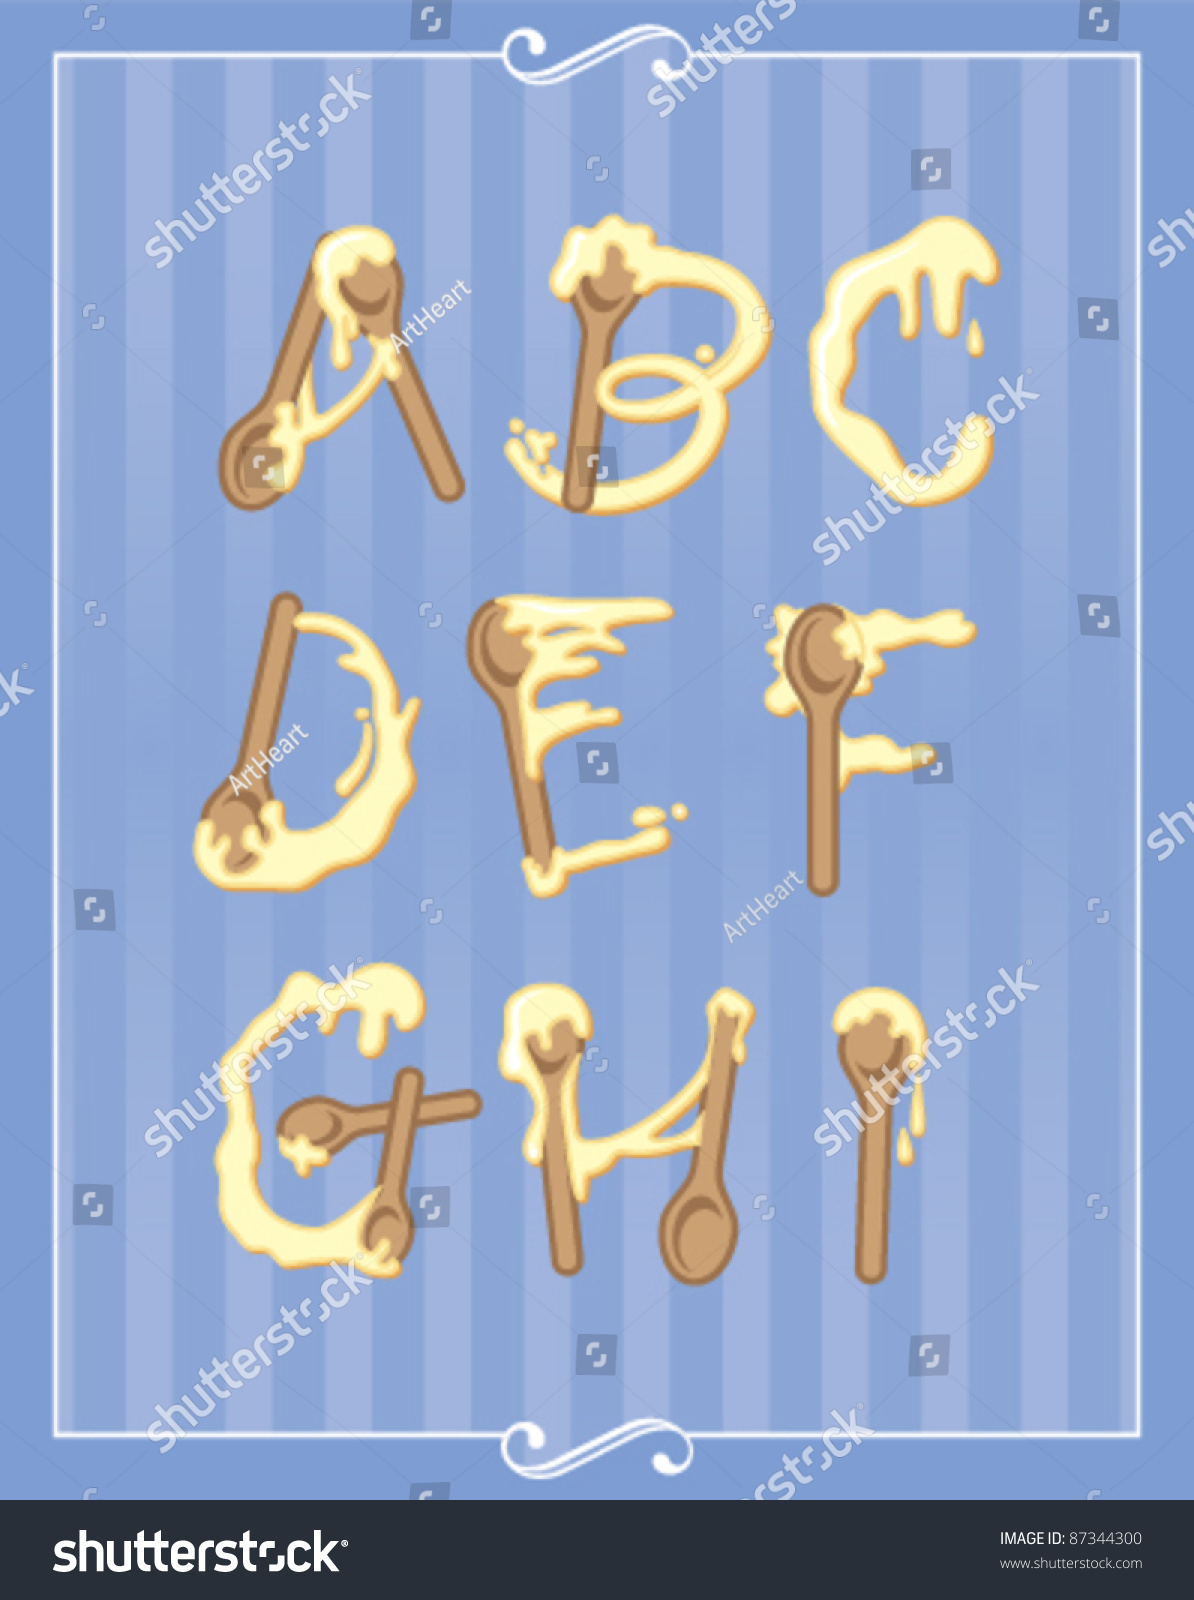 SVG of Baking Alphabet of spoons mixing sticky batter or dough, part 3 of 3 (r - z) svg